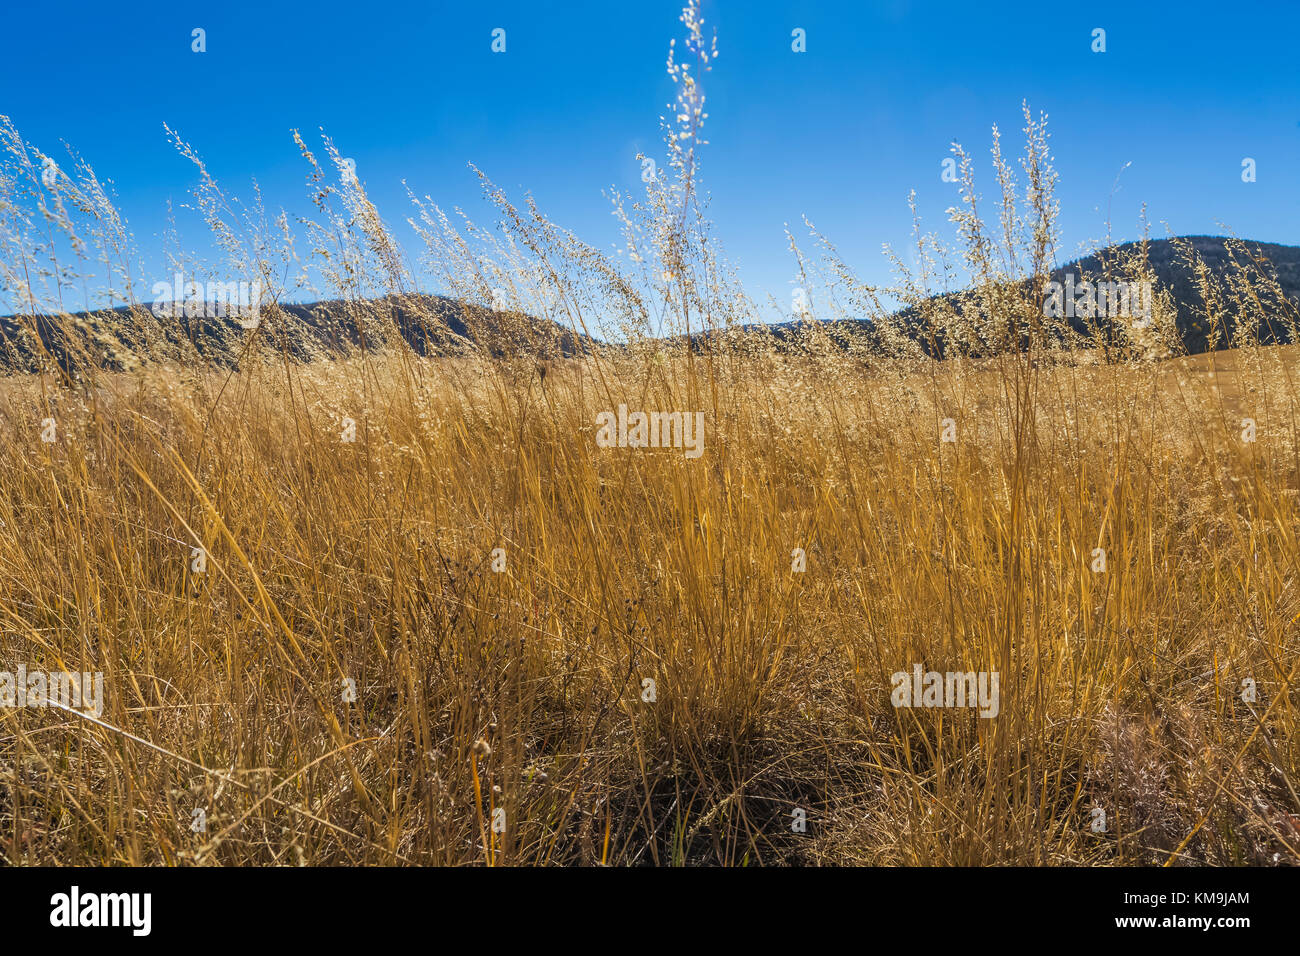 San Antonio Creek running through the vast grasslands of Valles Caldera National Preserve, a National Park Service preserve in northern New Mexico, US Stock Photo